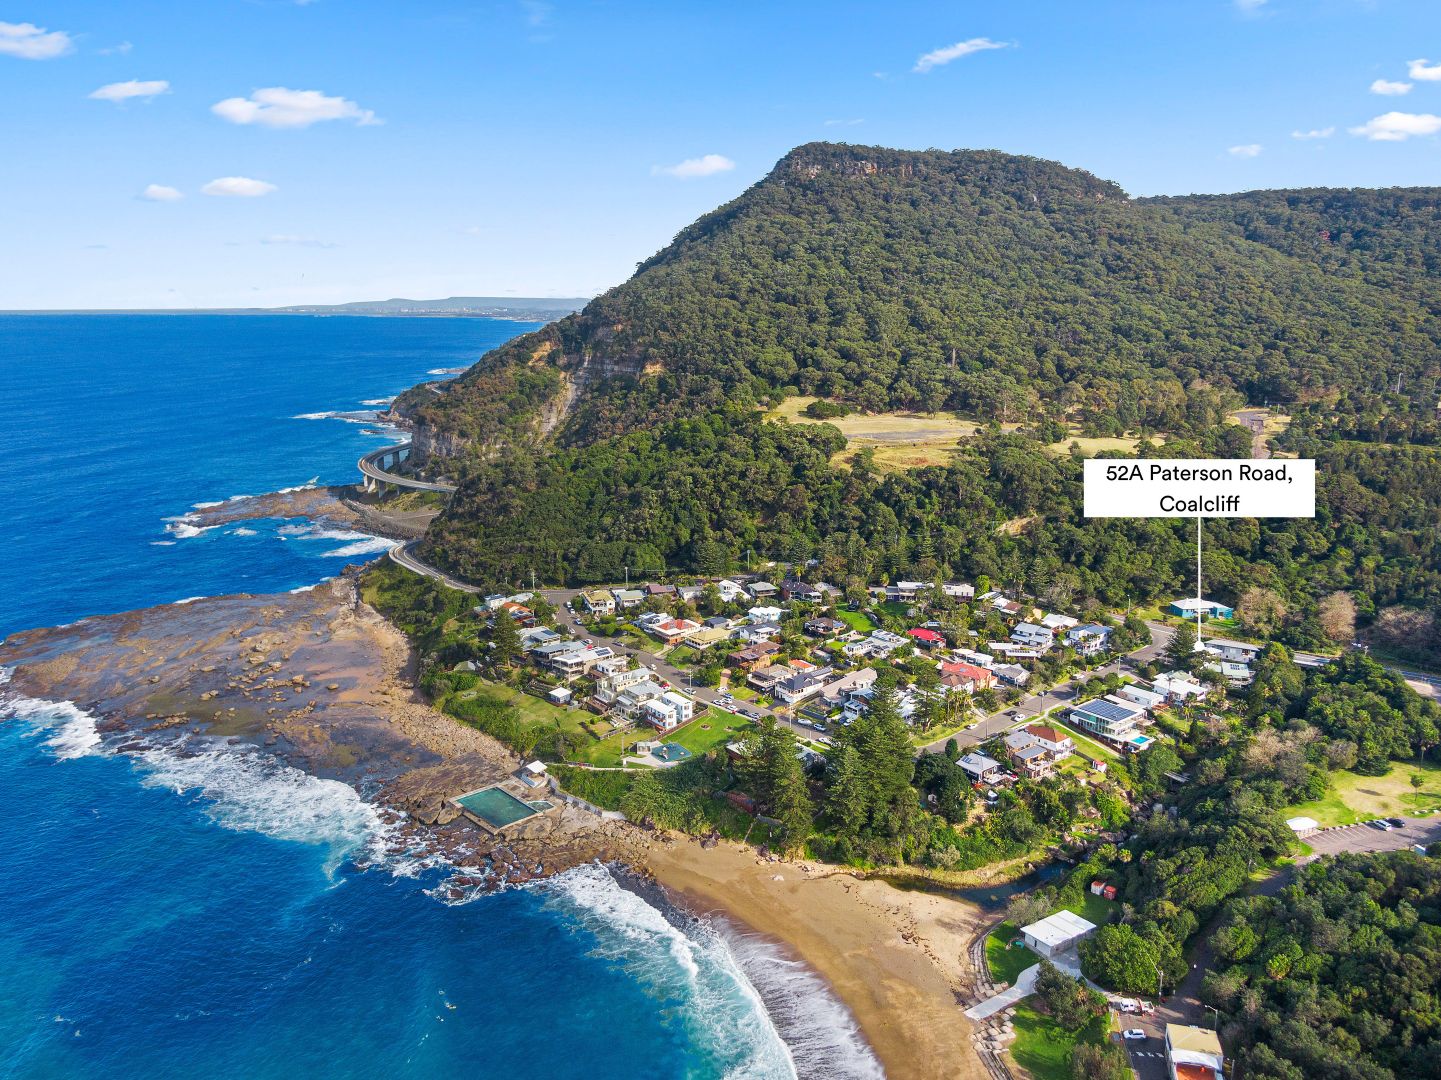 52A Paterson Road, Coalcliff NSW 2508